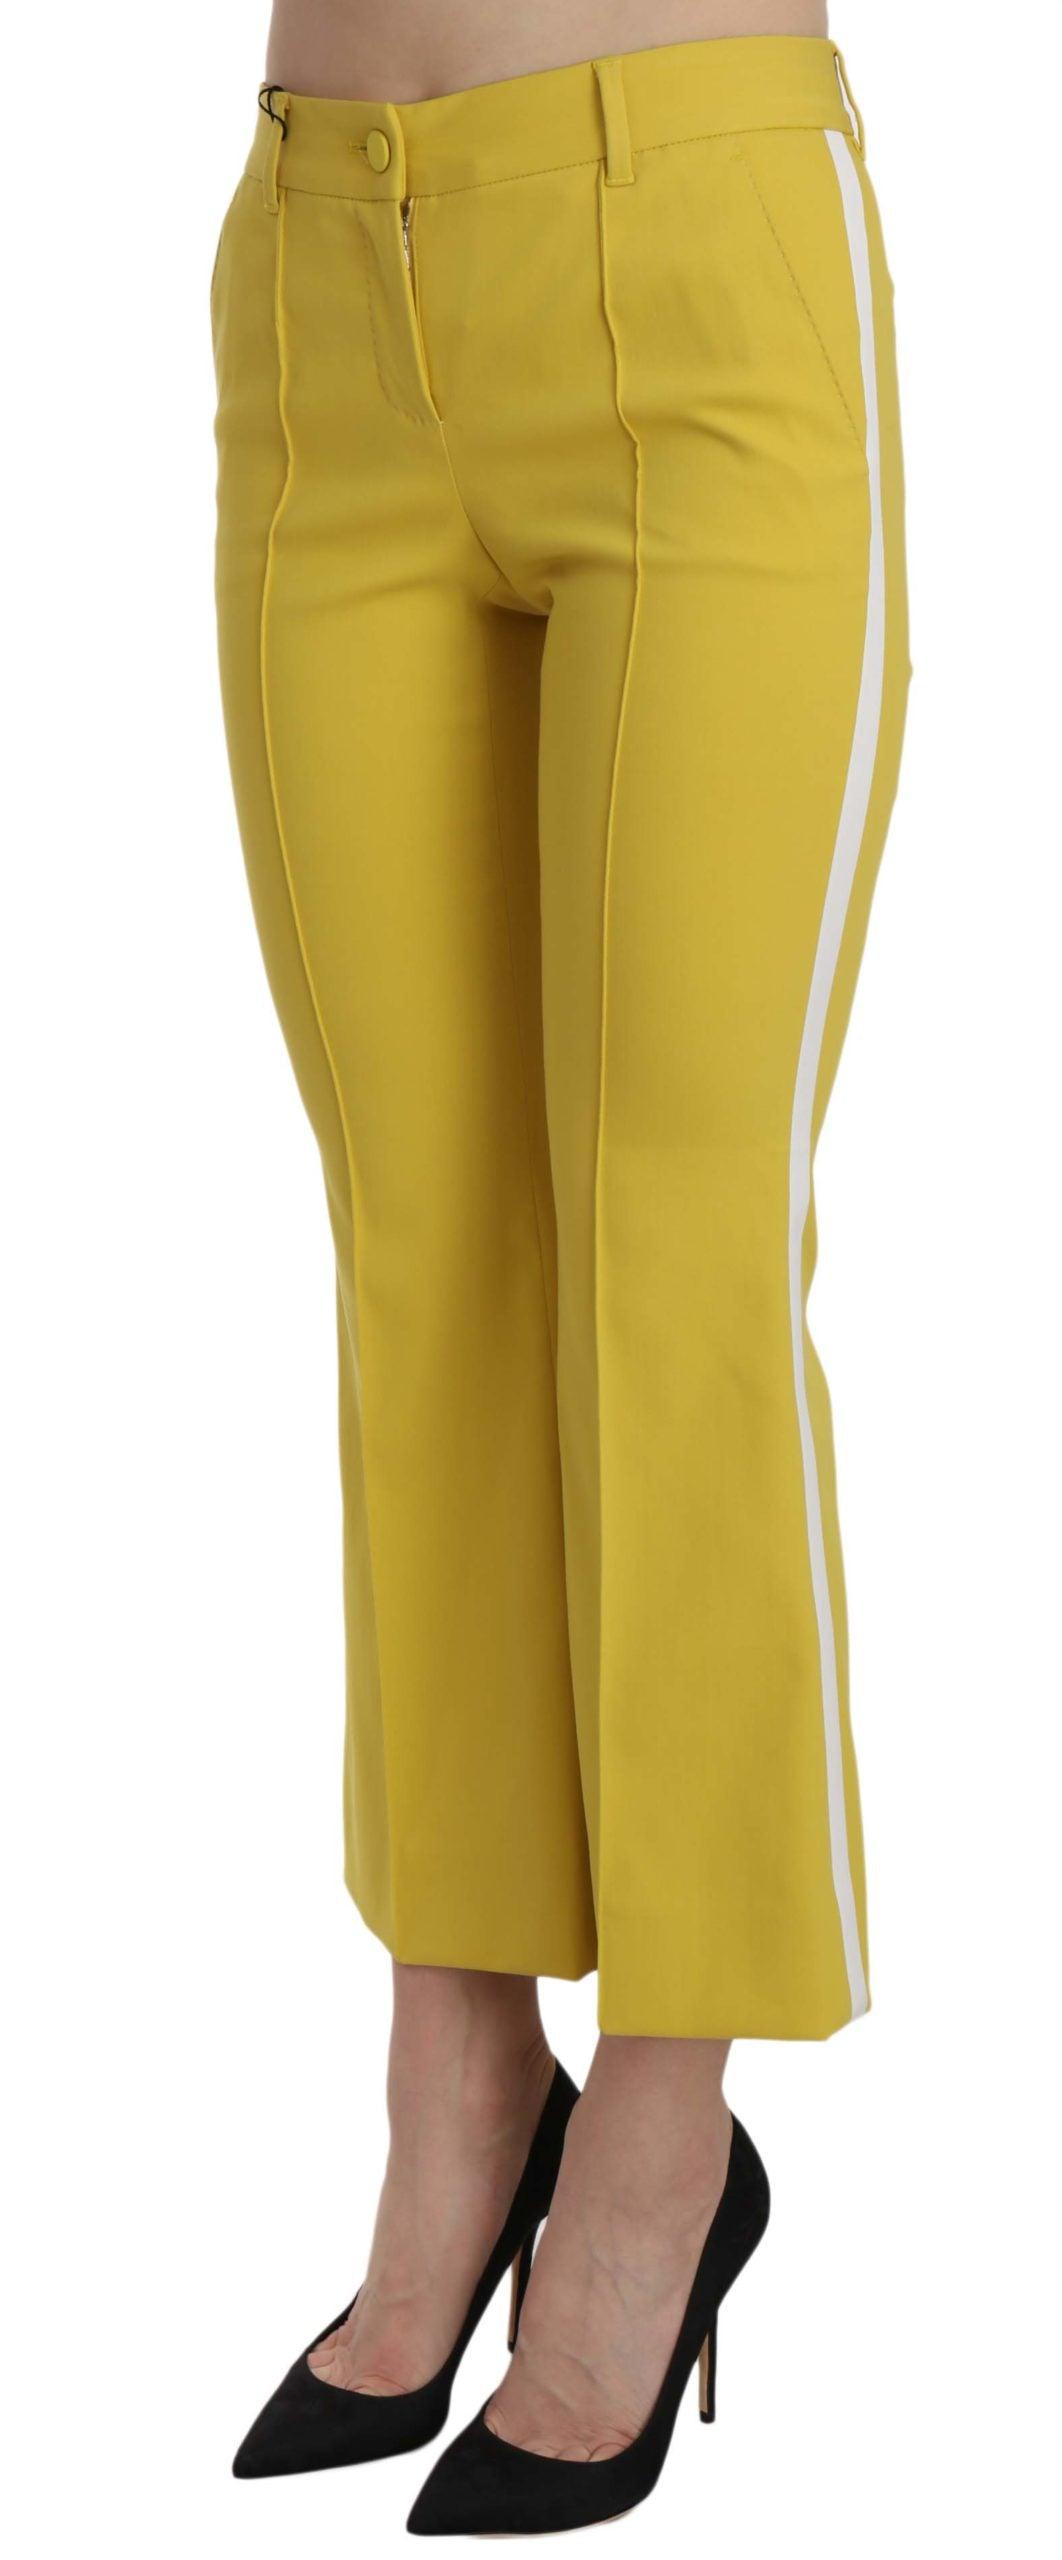 Yellow Flared Bootcut Capri Cotton Pants designed by Dolce & Gabbana available from Moon Behind The Hill's Women's Clothing range